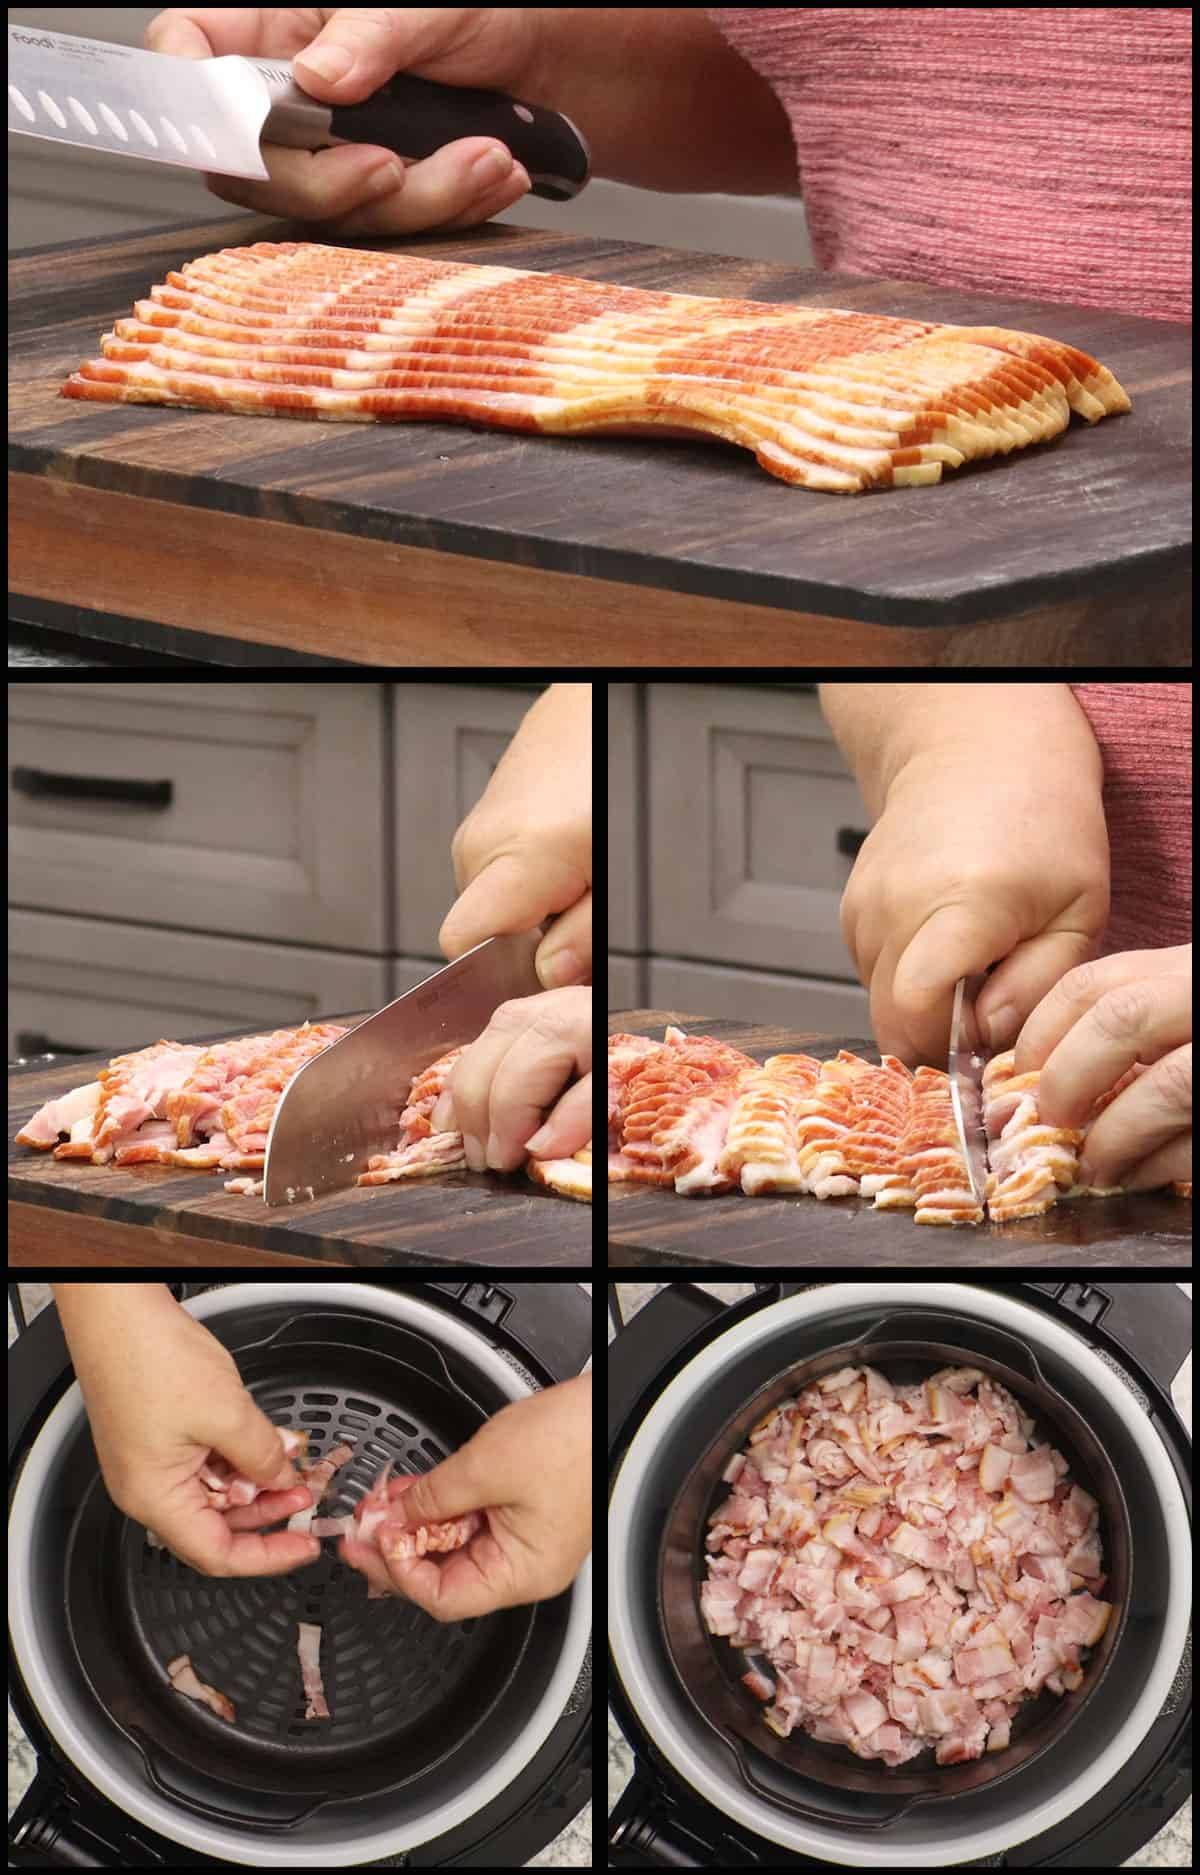 cutting the bacon into strips and separating for air frying.